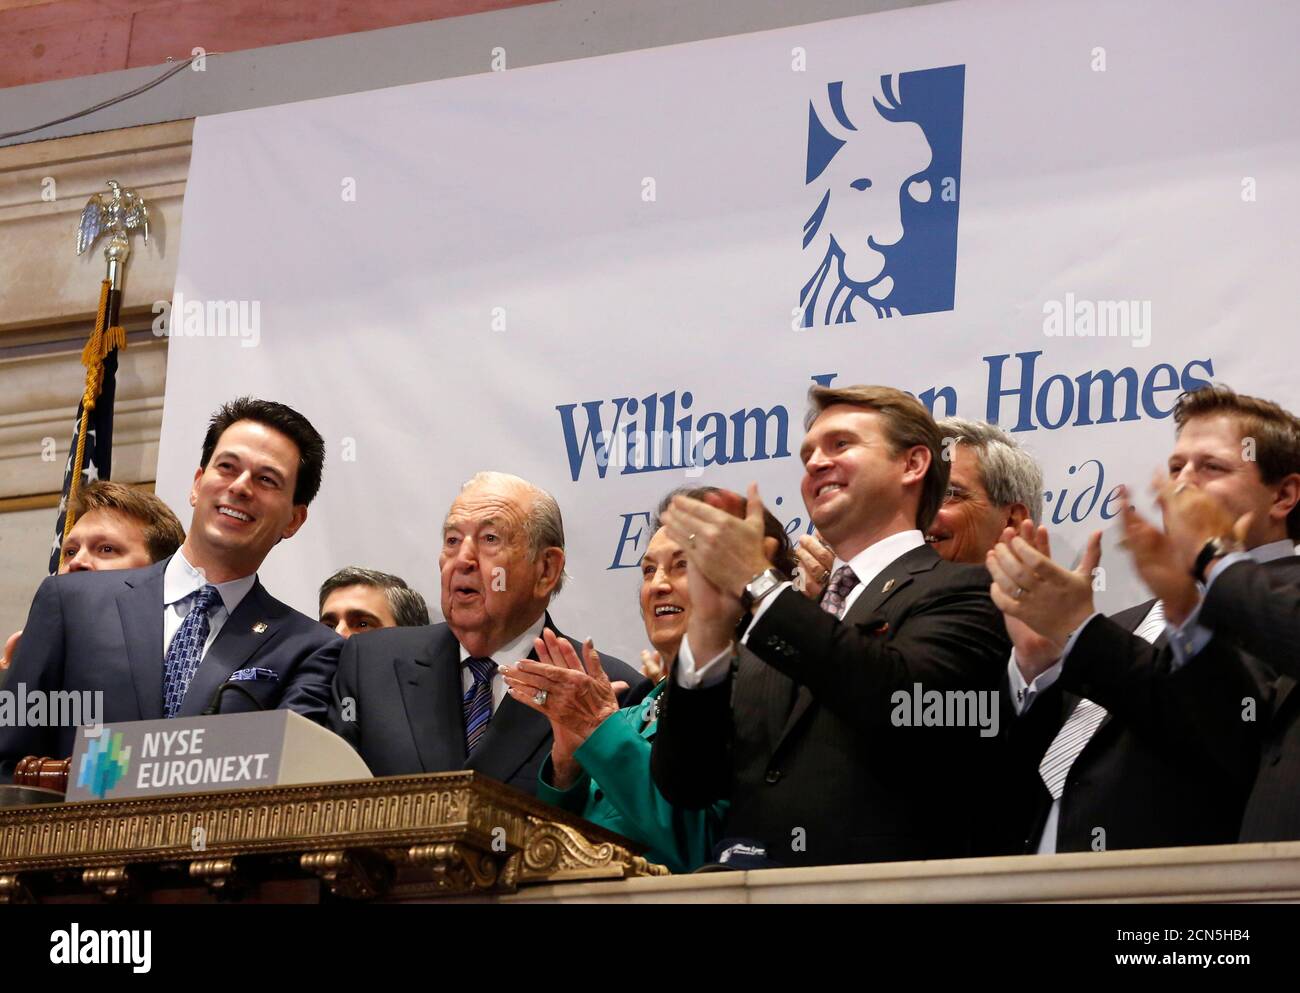 William Lyon Homes Inc. CEO William H. Lyons (L) and Gen. William Lyon (2nd-L) company founder, ring the opening bell at the New York Stock Exchange with company executives to celebrate their IPO, May 16, 2013.  William Lyon Homes Inc's shares opened 5 percent above their IPO price in their market debut, valuing the homebuilder at more than $800 million. The Newport Beach, California-based company is the third U.S. homebuilder to go public this year, seizing on investor appetite driven by a housing supply crunch, low interest rates and a recovering economy. Shares rose as much as 8 percent, or Stock Photo